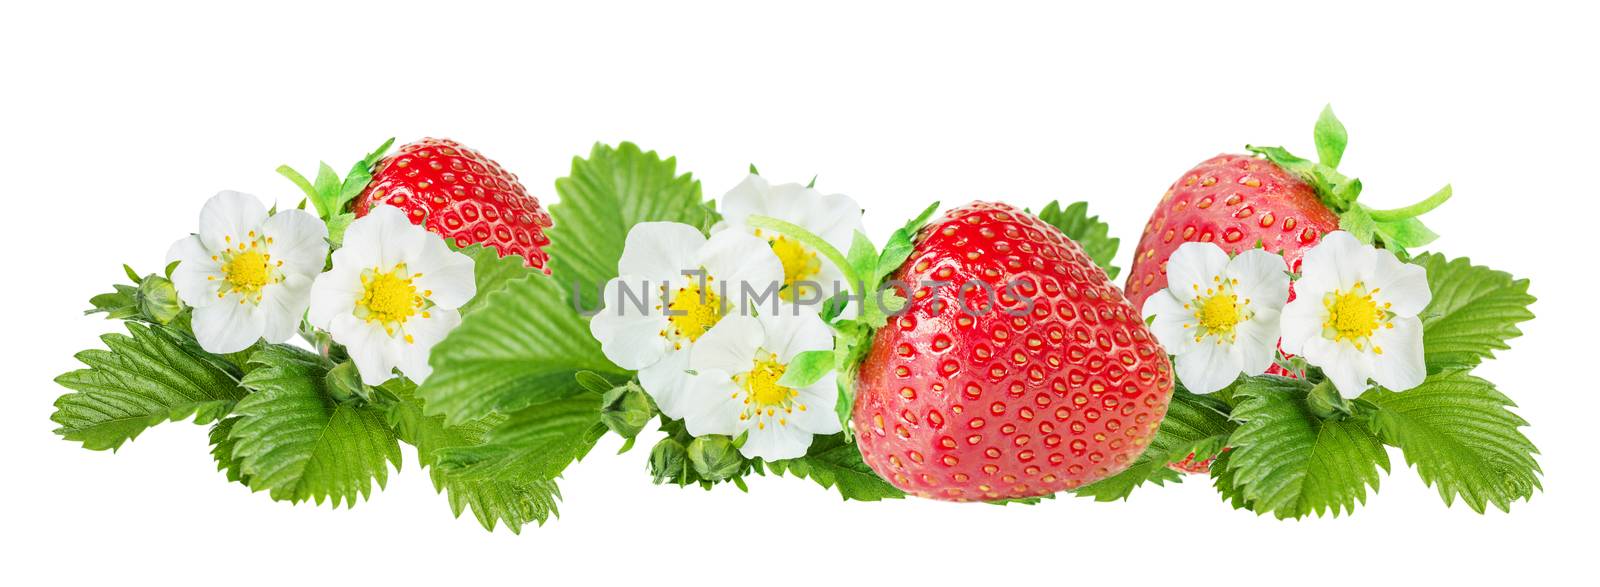 Border composed of large red ripe strawberries and white flowers and green leaves of strawberry isolated on white background